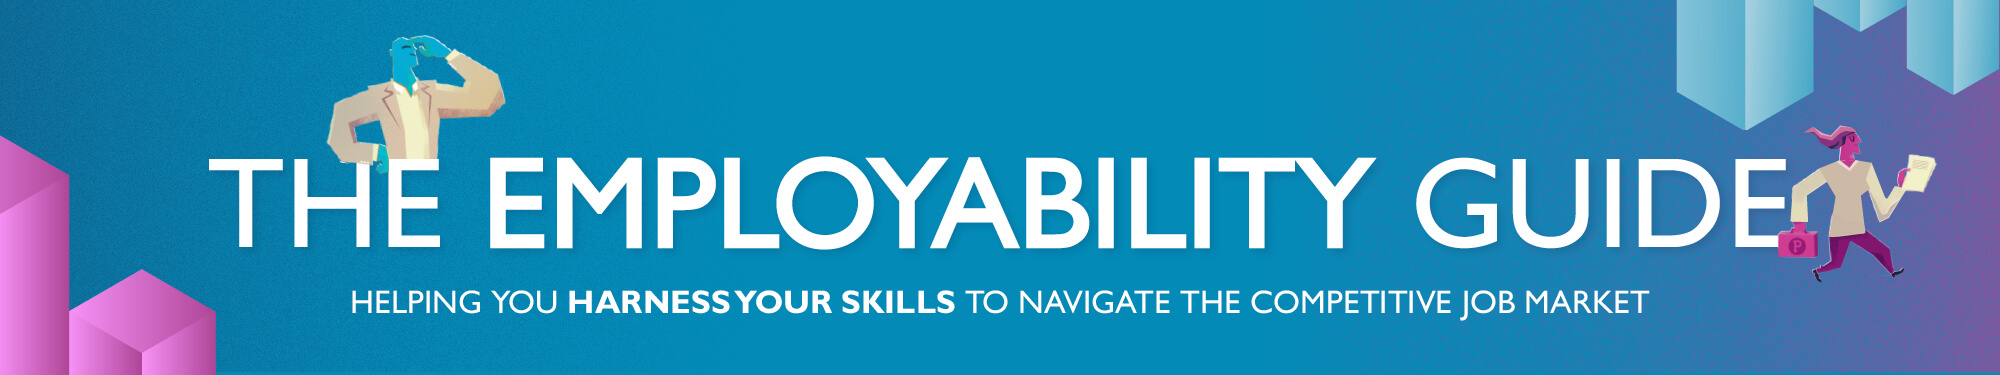 The Employability Guide tagline on blue background with avatar characters